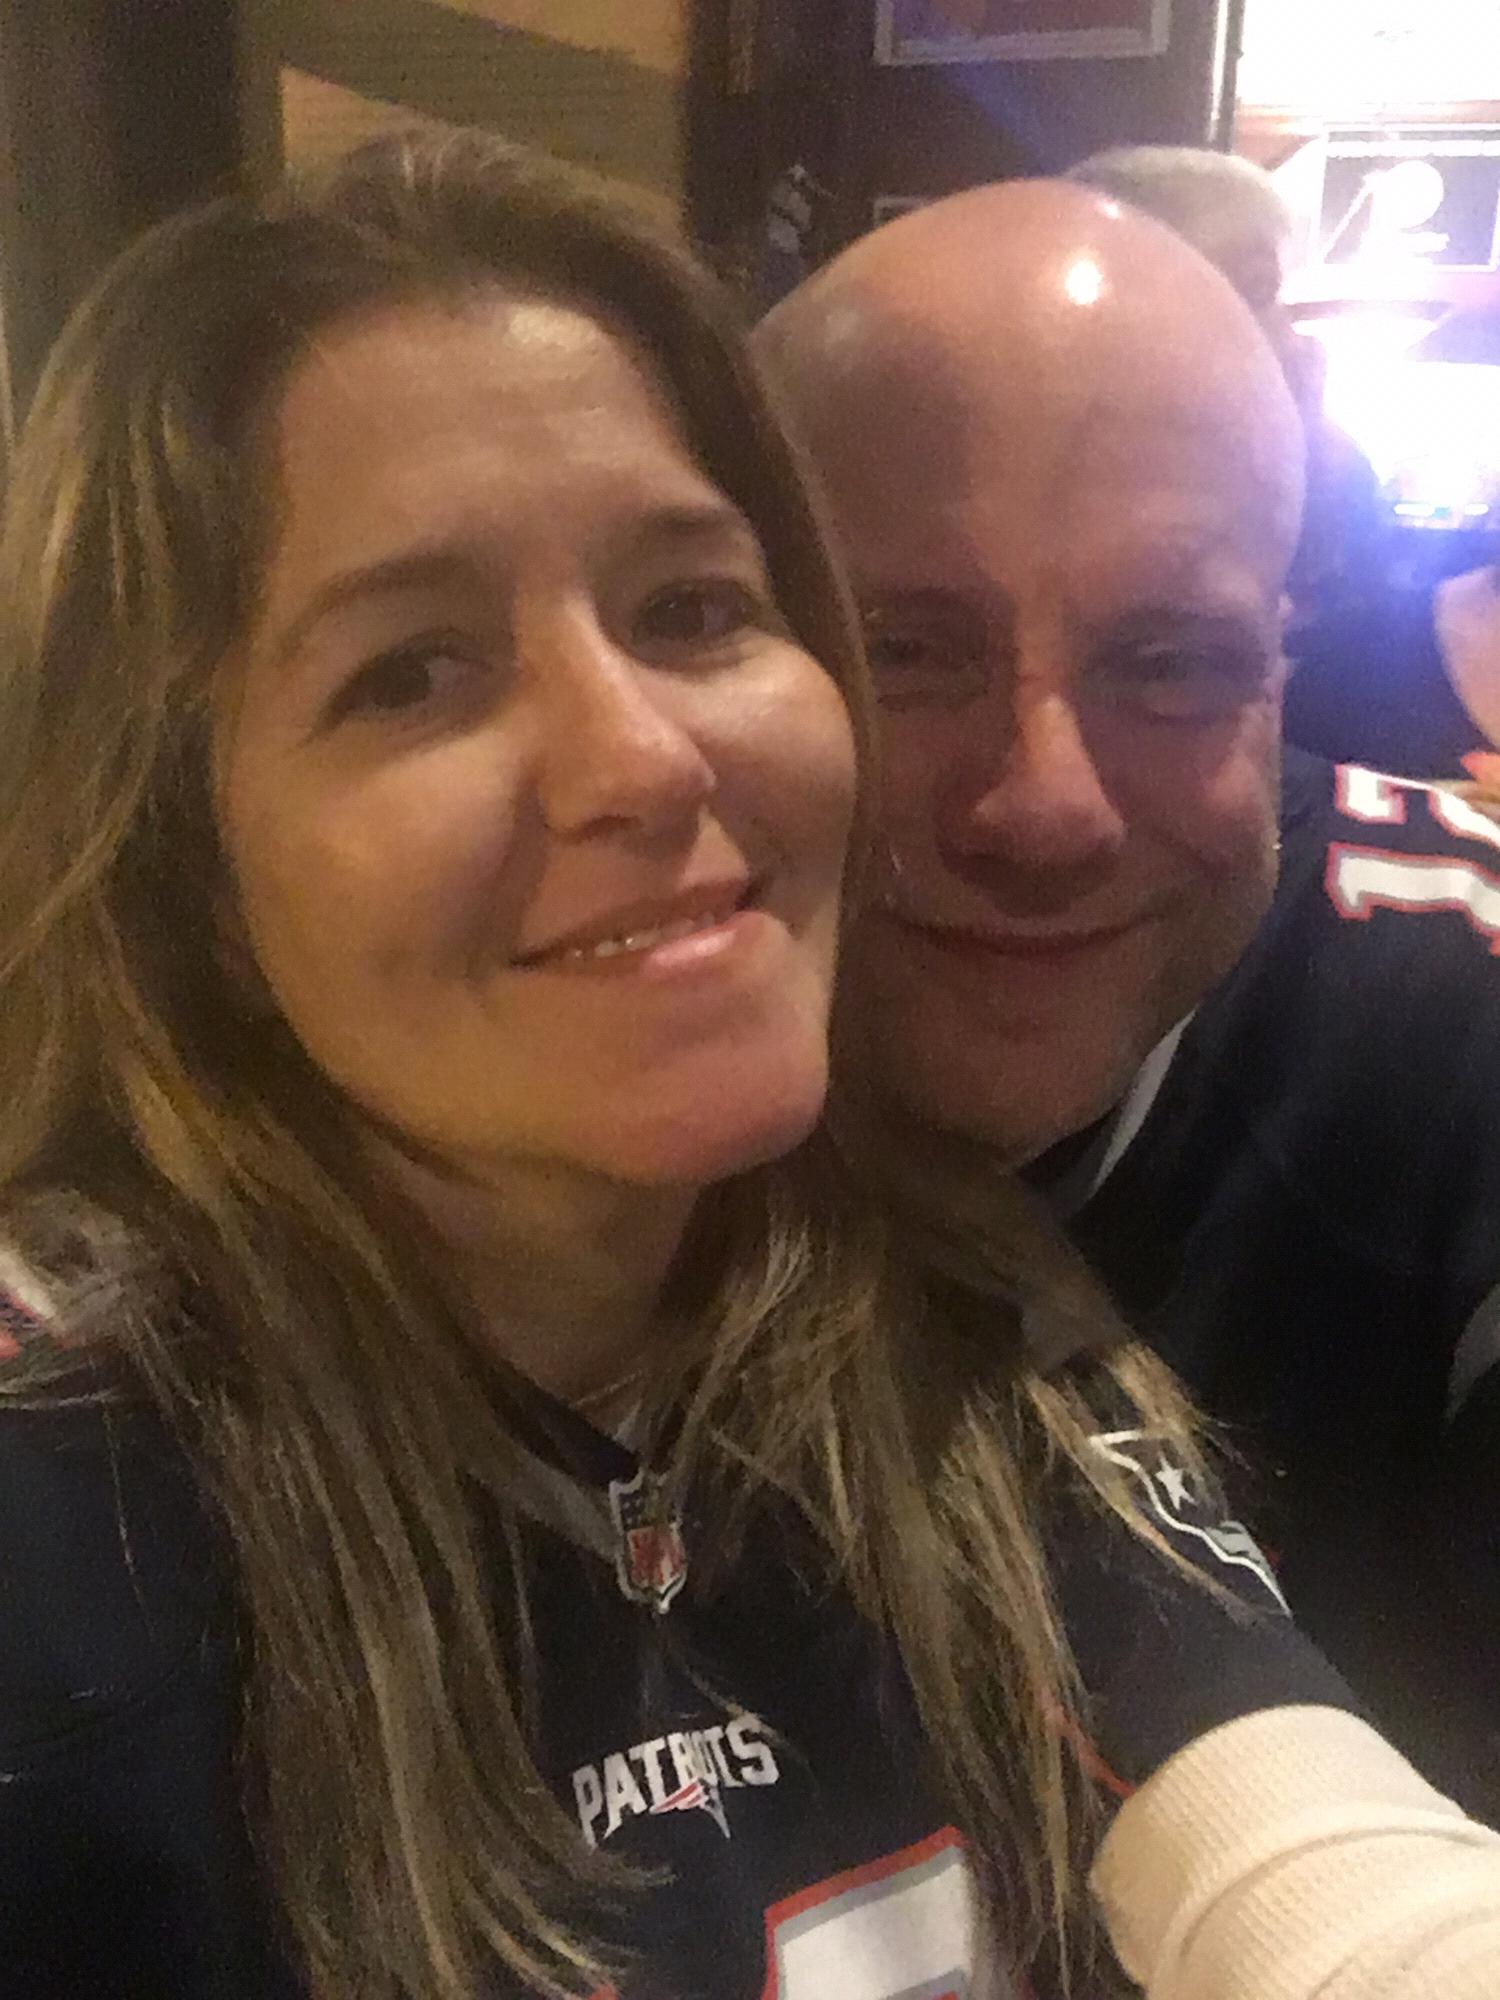 Our Engagement Night in Boston 10/04/18 💍
Watching the Pat win at the Beantown Pub in Boston 🍻